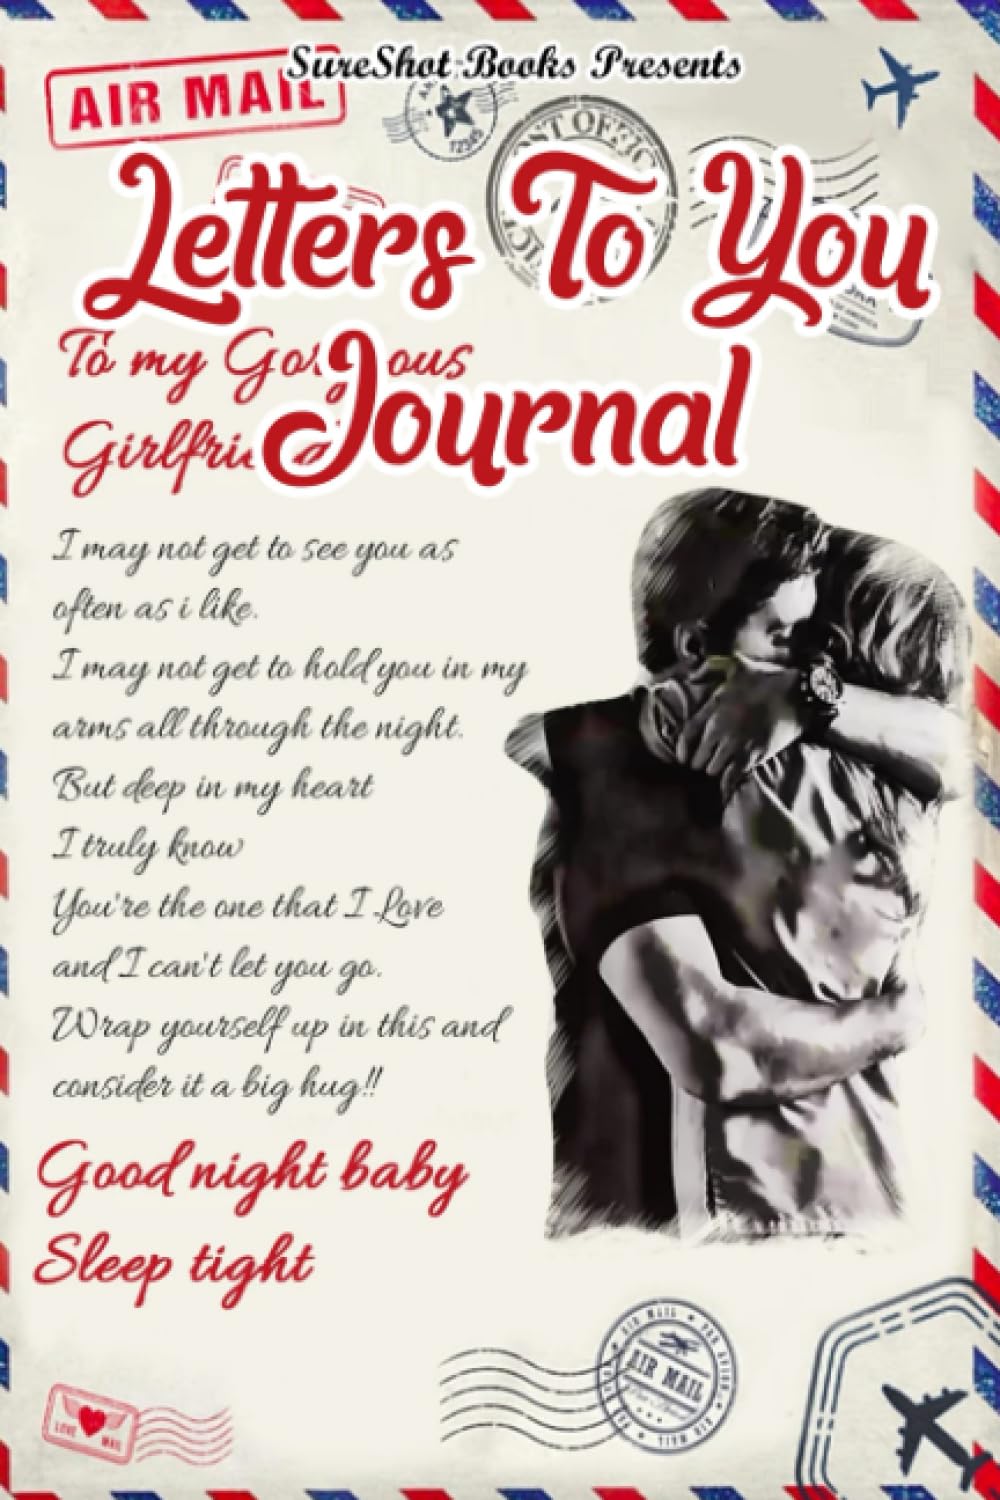 Letters To You Workbook For Inmates: Guided Journal with space to write letters, Includes Prompts to share your favorite Memories with your Partner, ... In Long Distance Relationships, 116 Pages - SureShot Books Publishing LLC